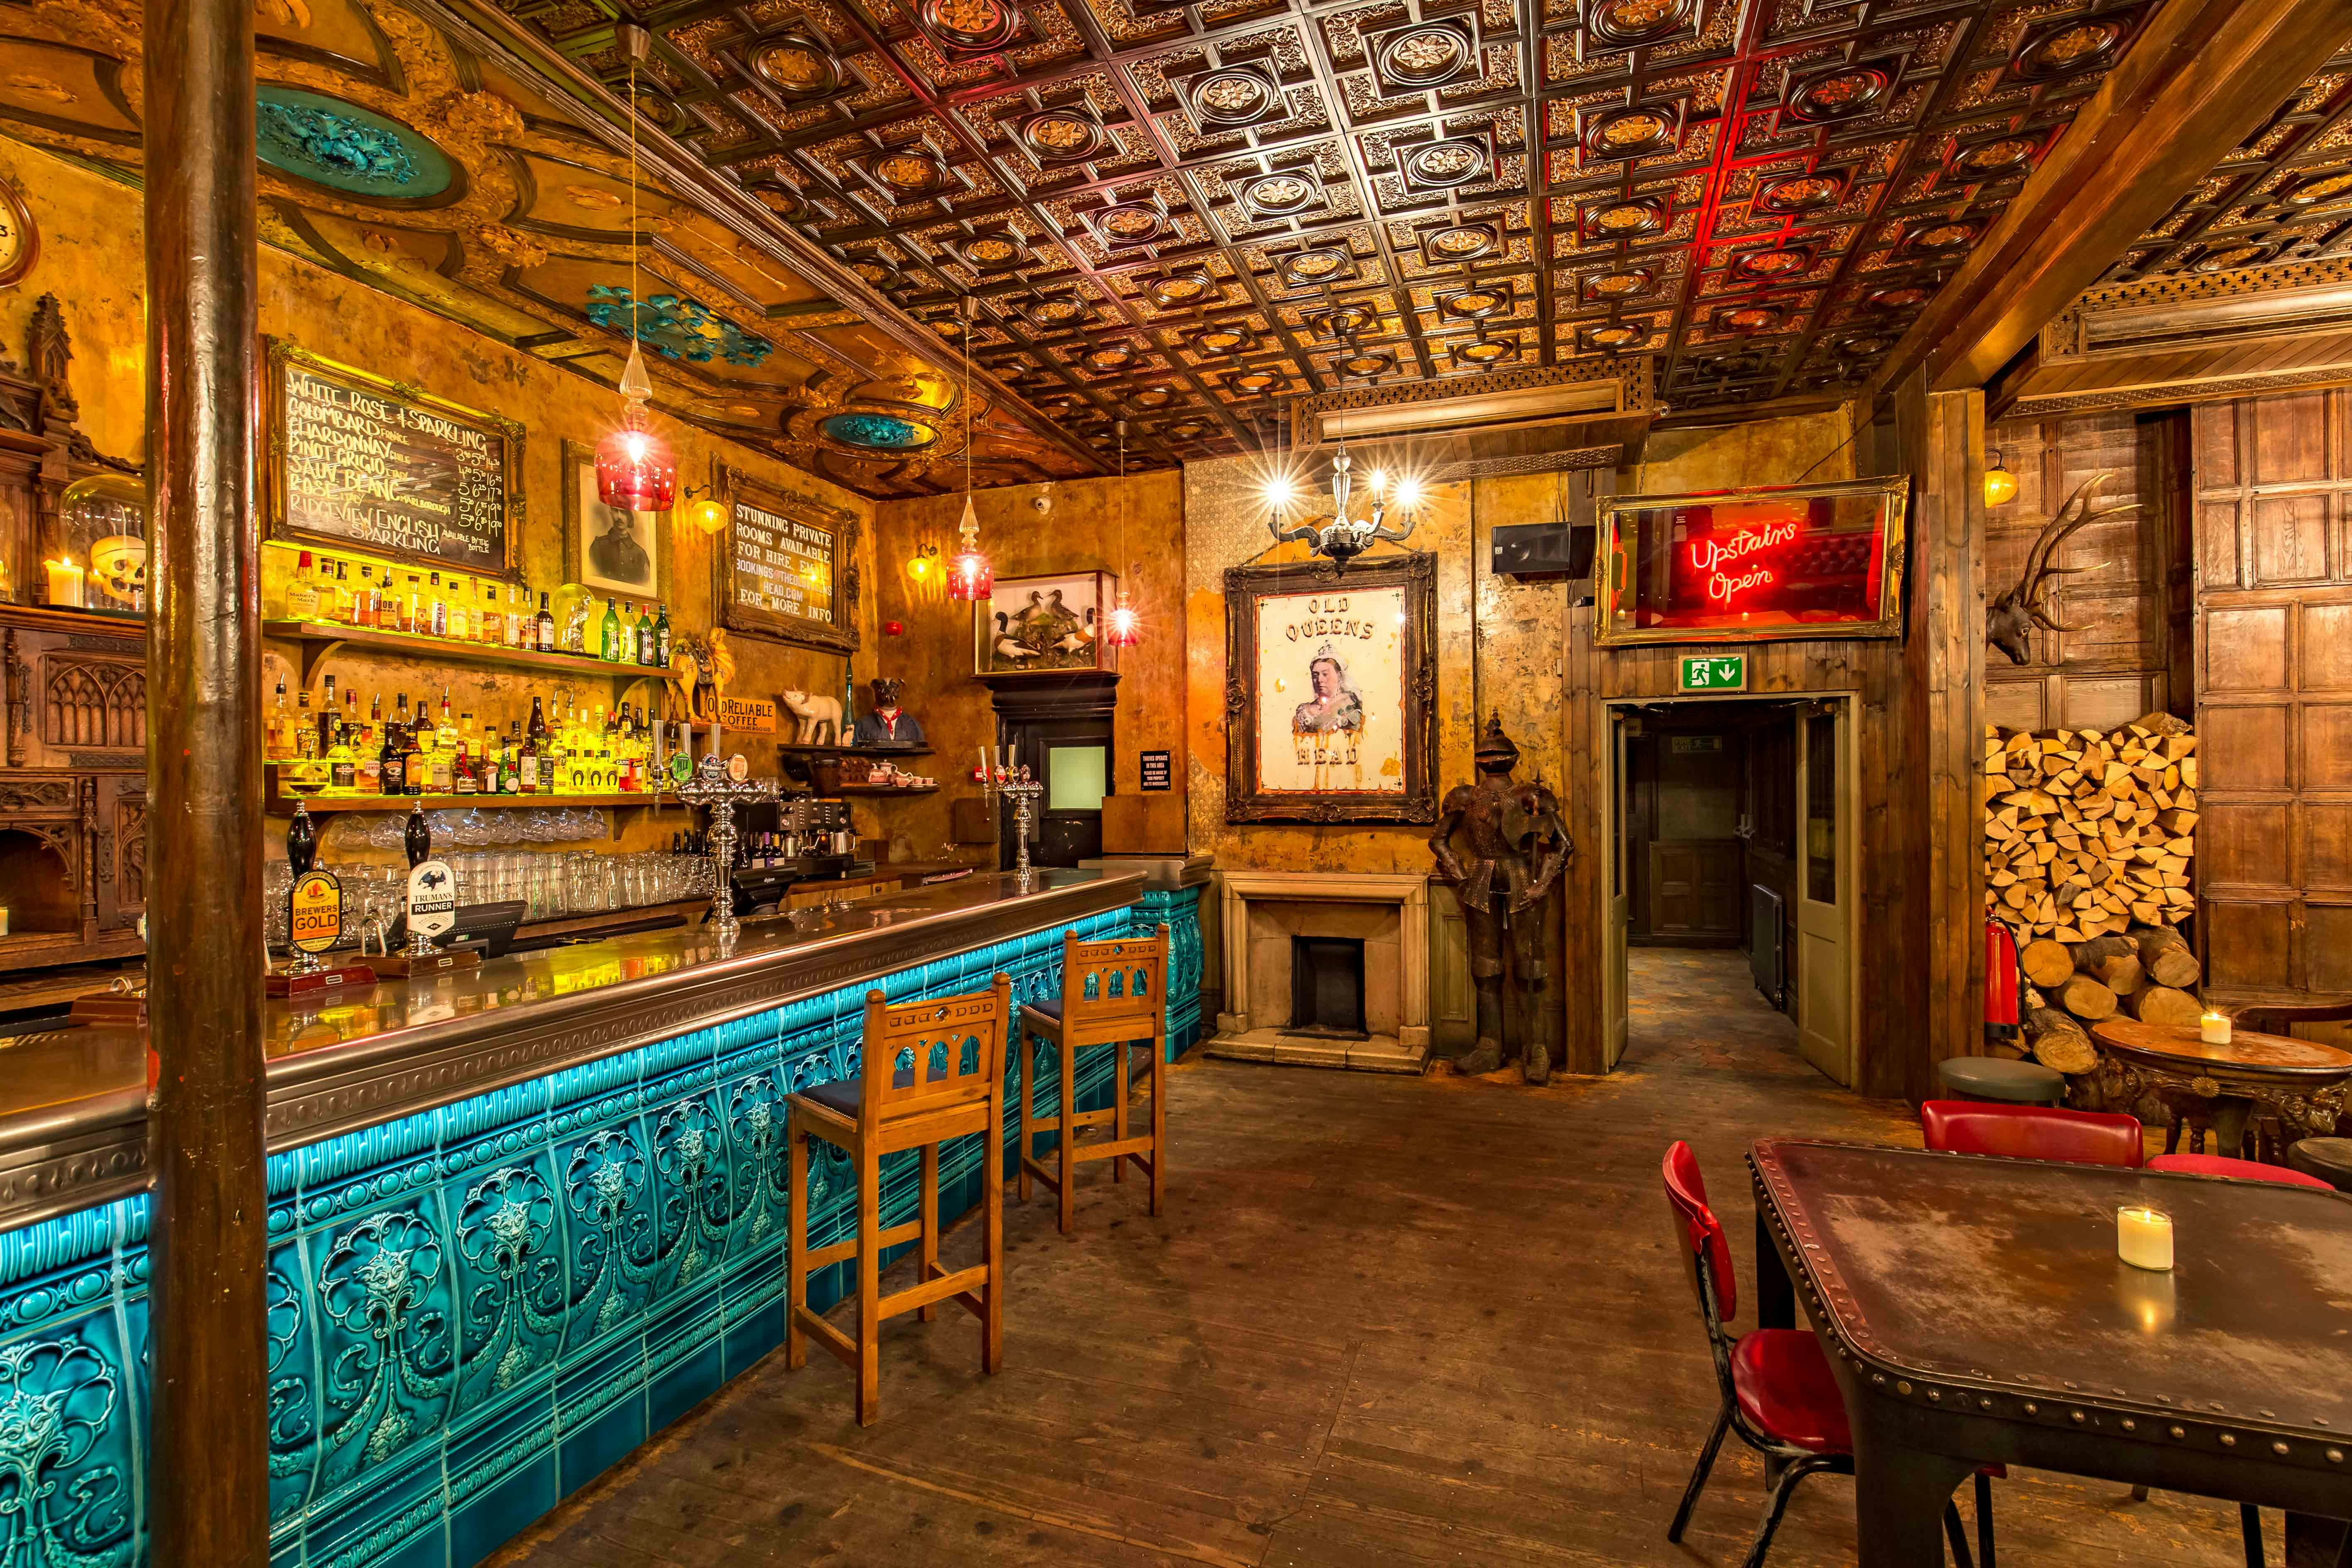 Filming Venues in London - The Old Queen's Head